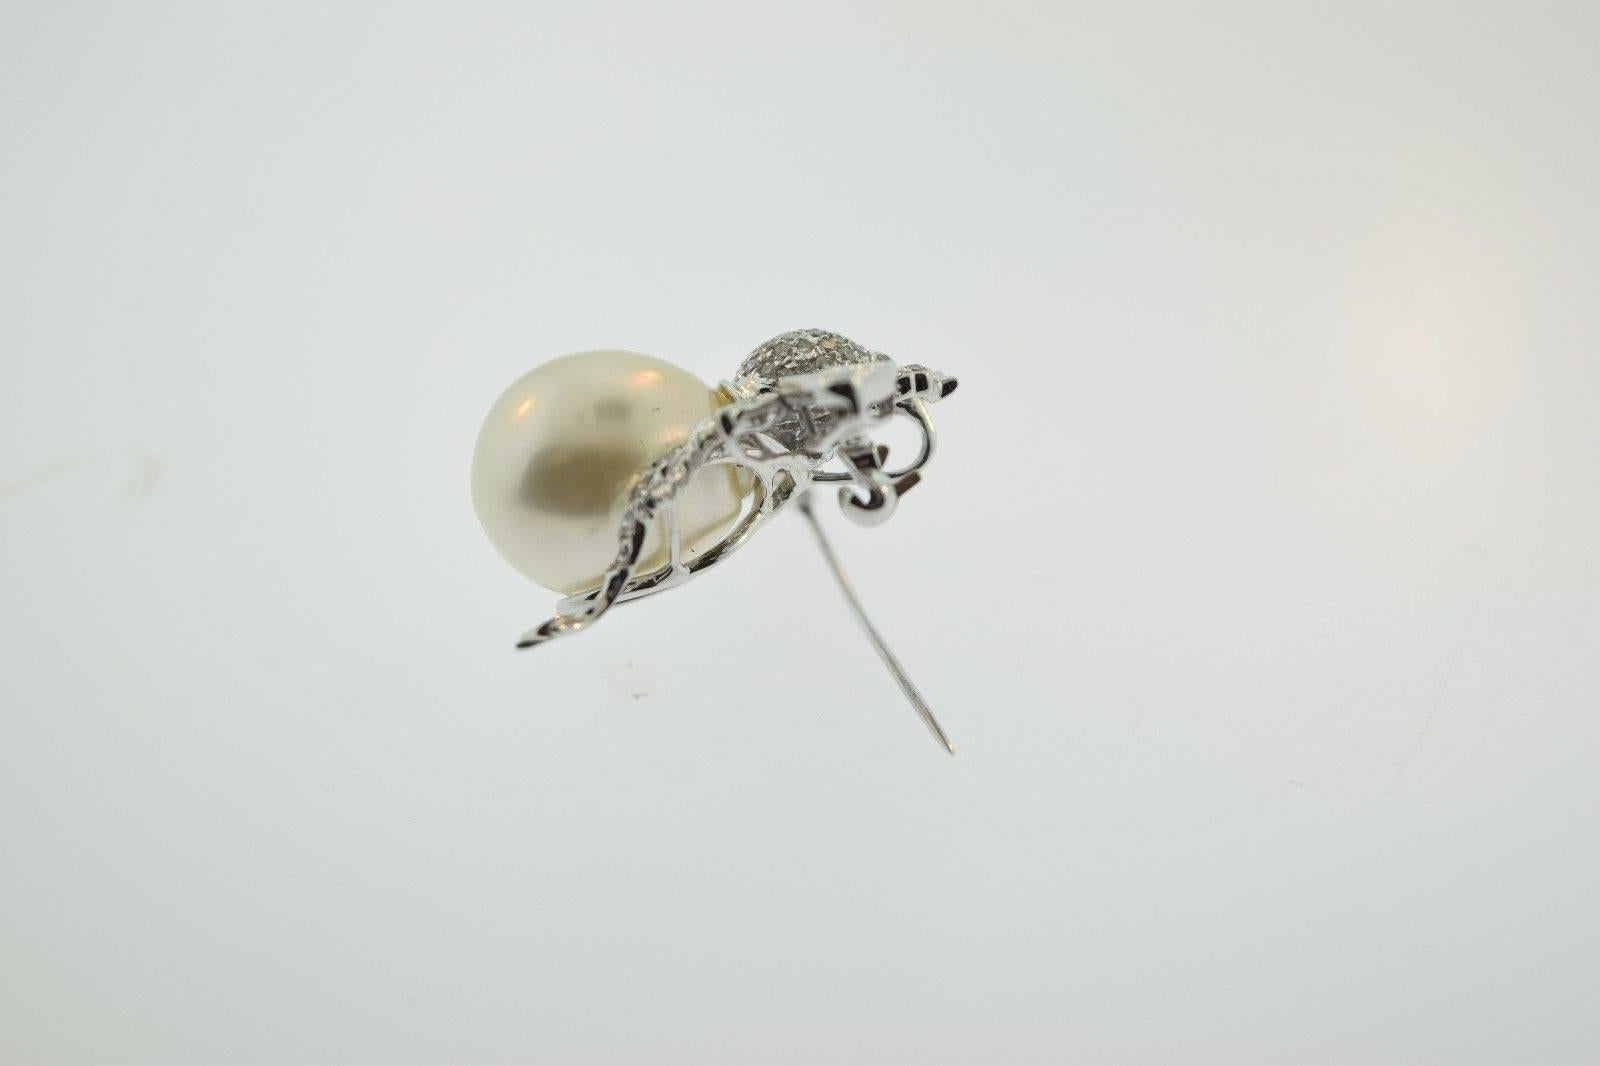 Bumble Bee Brooch/Pin for Pendant

Magnificent multi-purpose piece. Can be used either as a pin/brooch or a pendant attached to a beautiful chain.
Metal: 18k of White Gold
Stone: South Sea Pearl and Diamond
Pearl Length: 15 mm
Total Carat